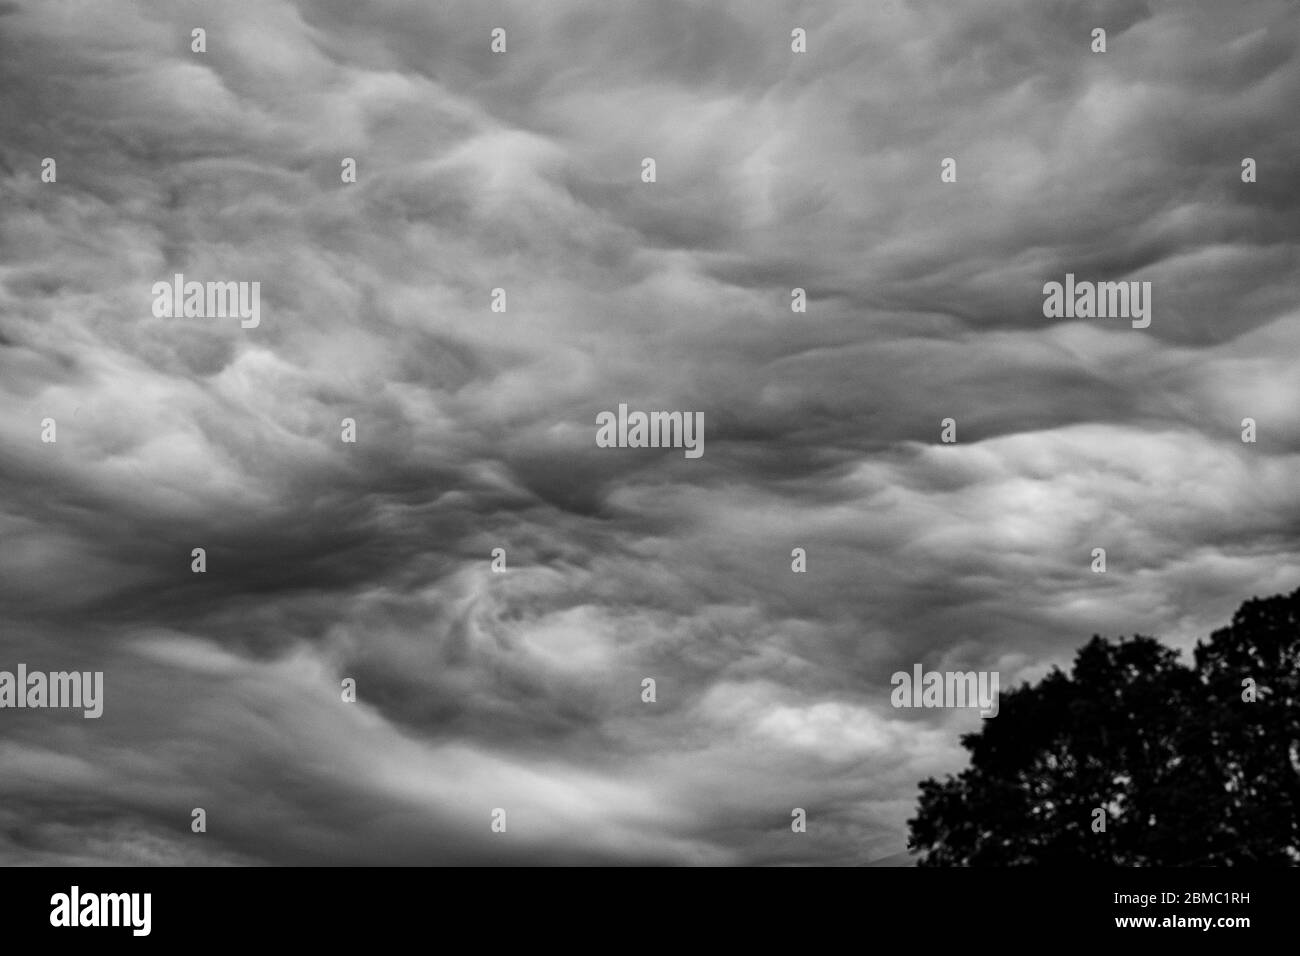 Storm clouds can bring bad weather with them, but they can have a beauty all their own. Stock Photo